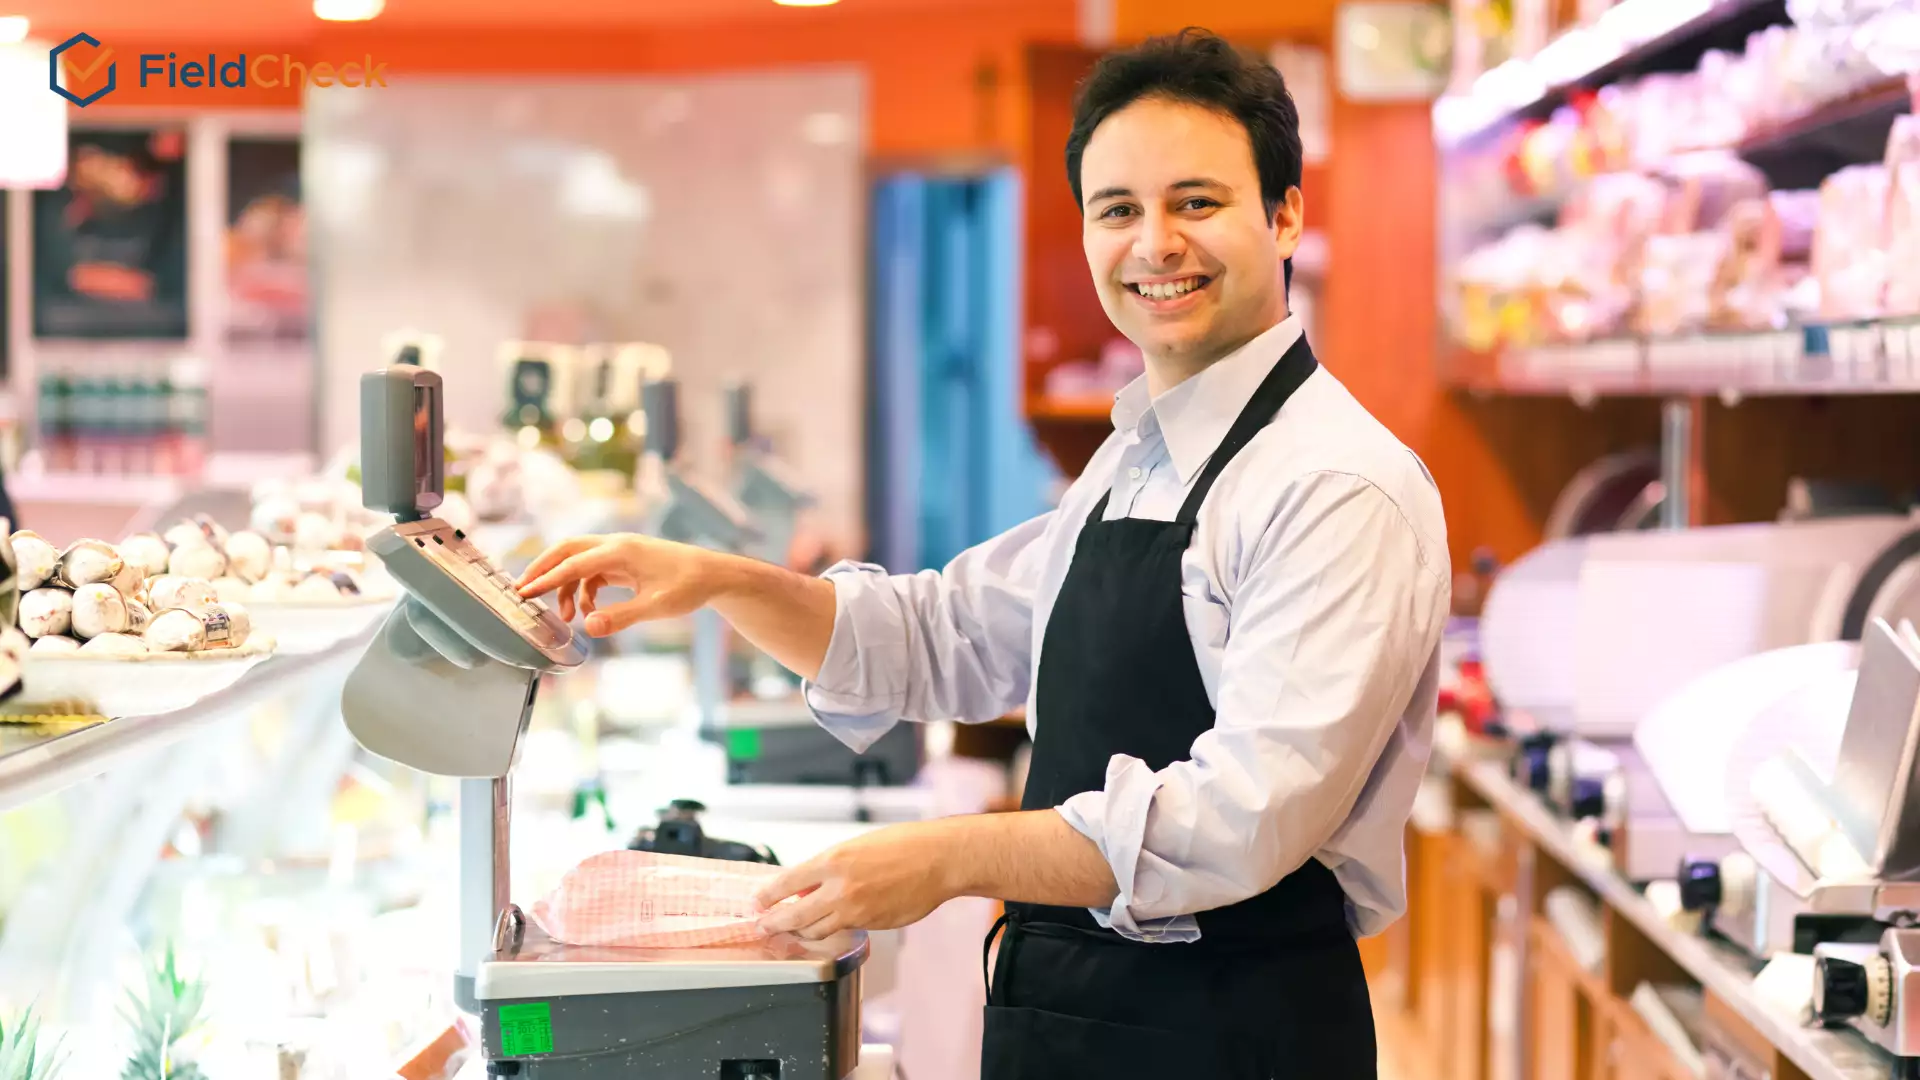 A Simple Way To Manage A Food Chain Store That You Should Not Ignore